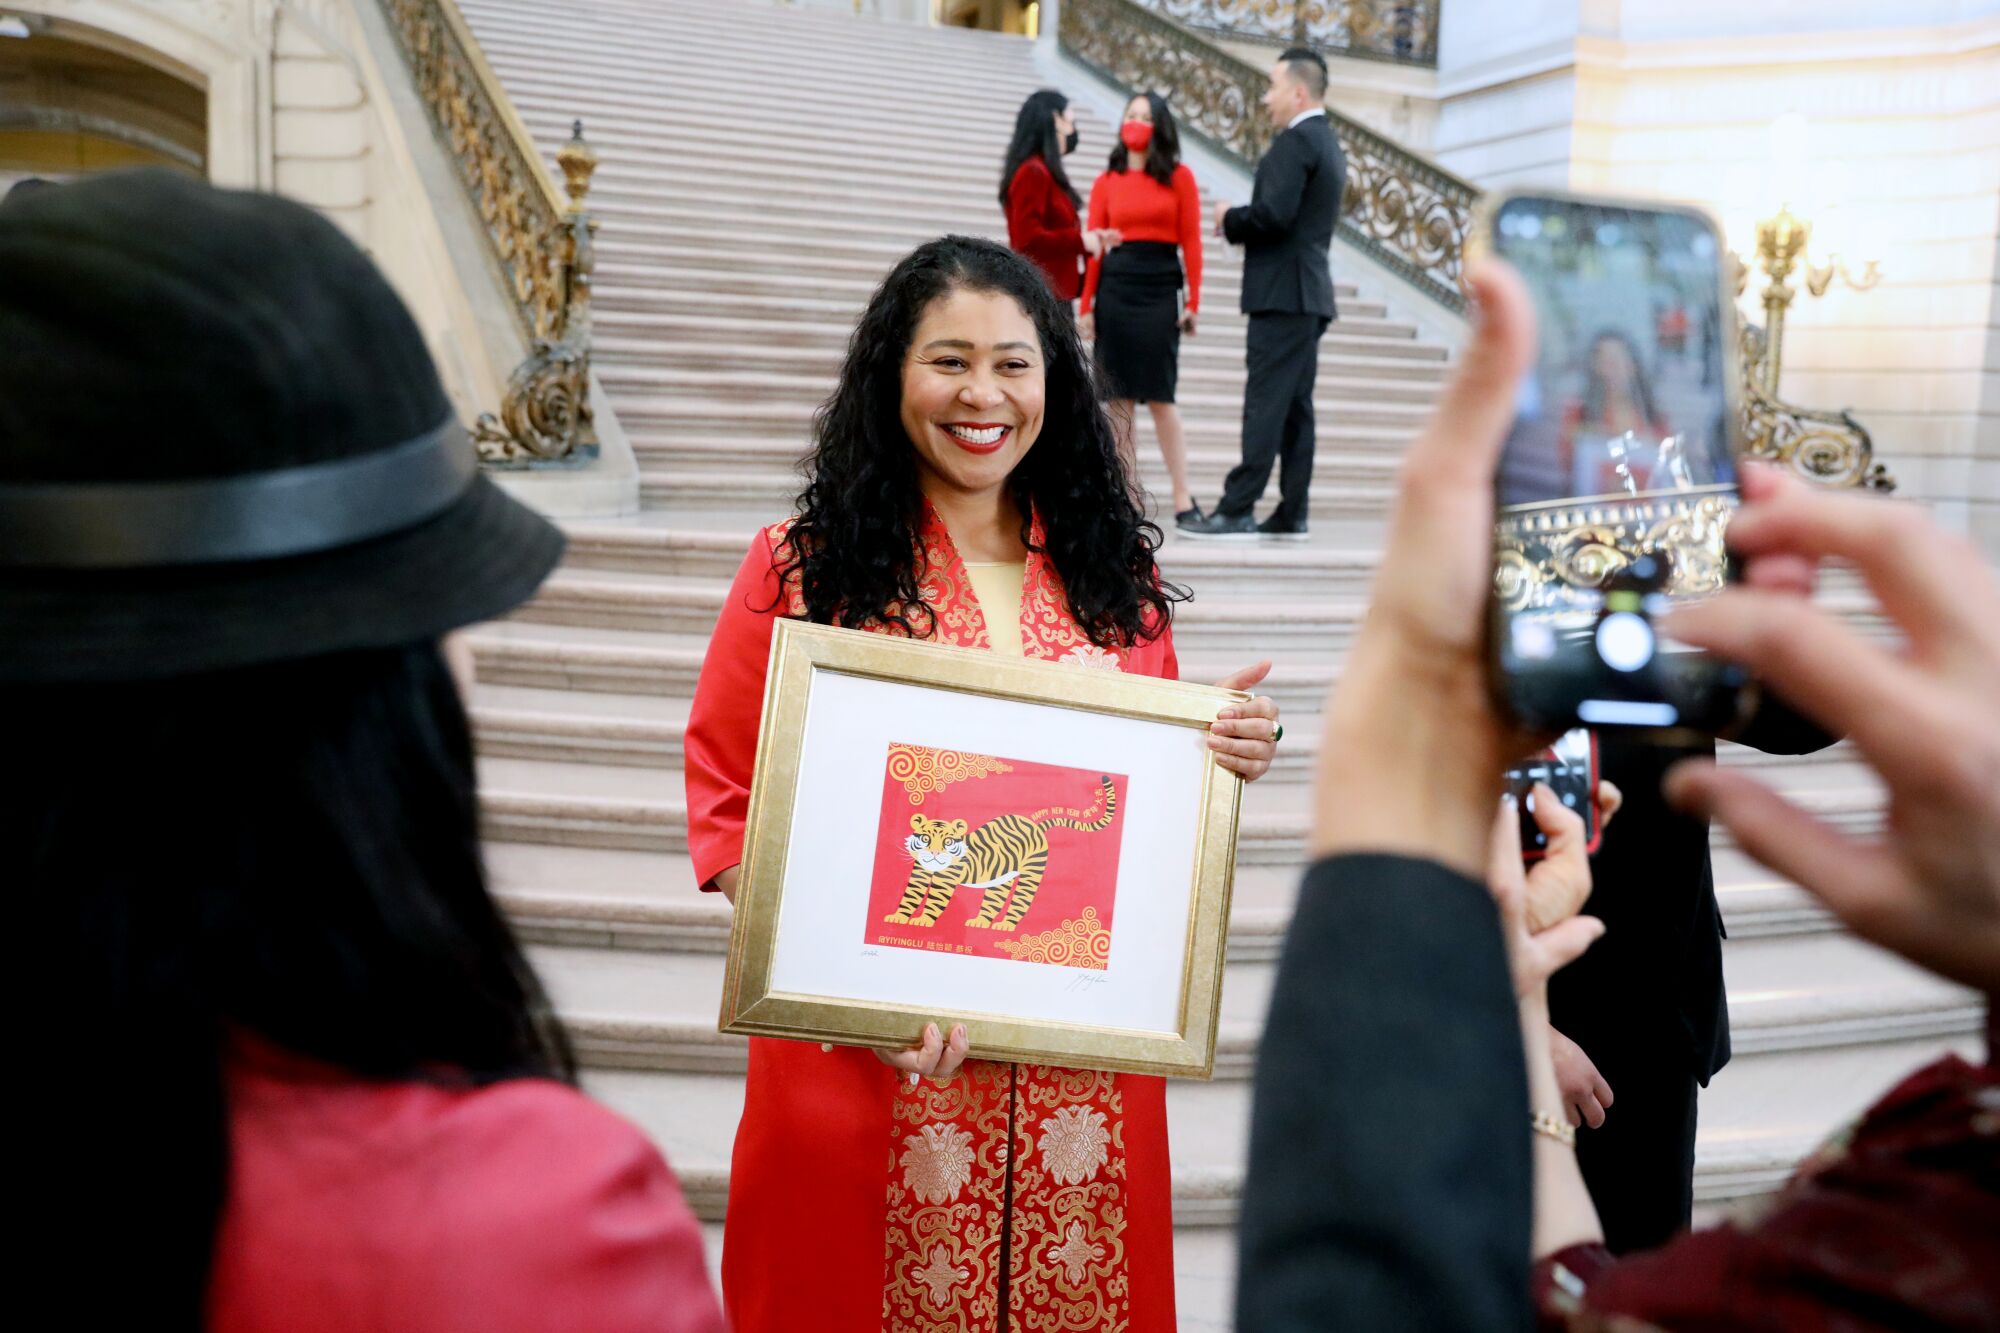 London Breed poses for photos at the bottom of a large flight of stairs while holding a picture of a tiger 